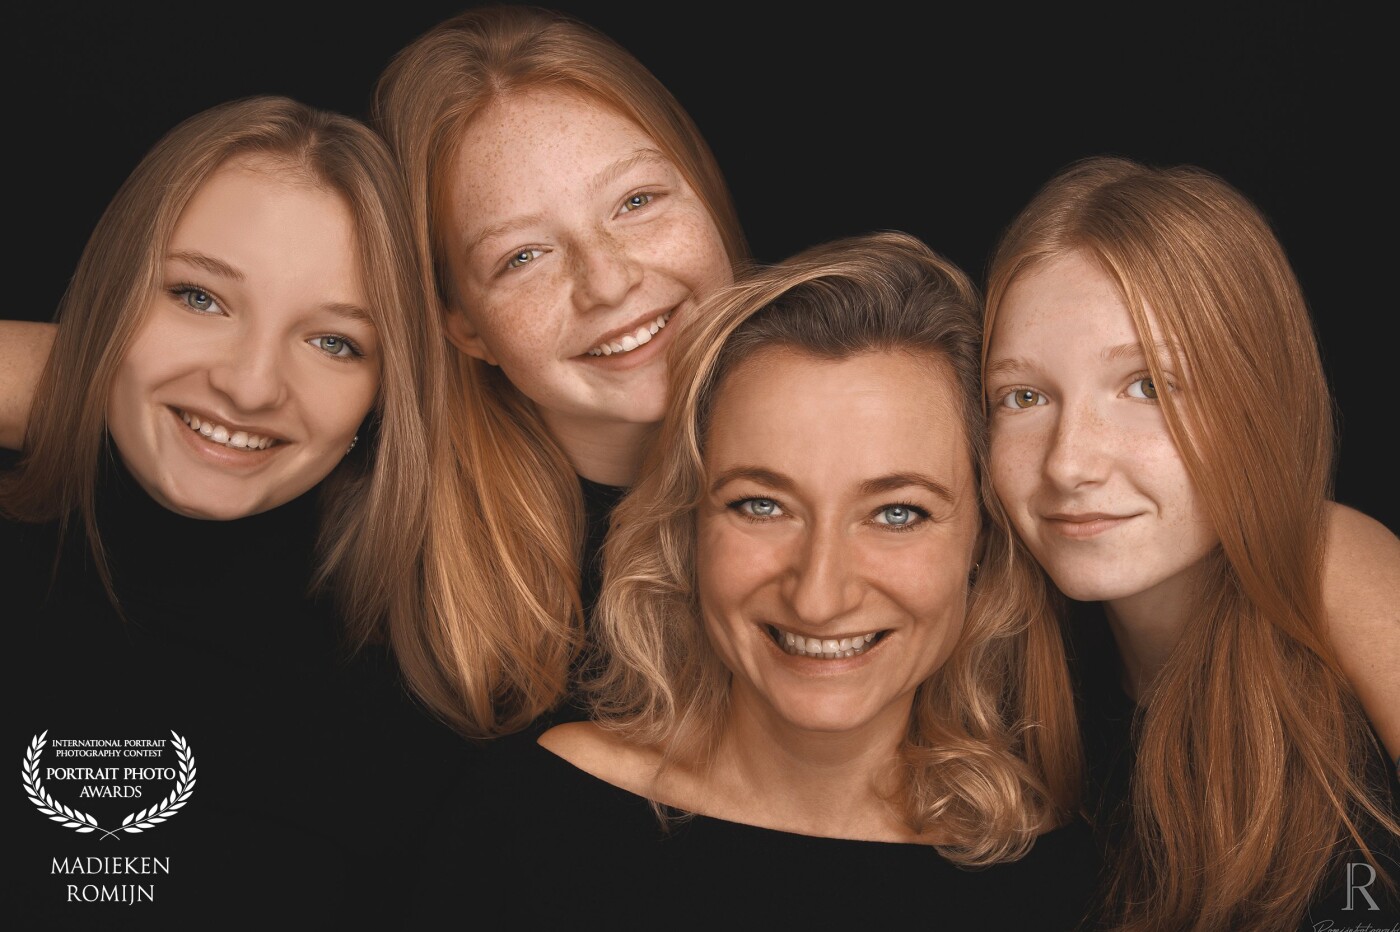 This was a portrait shoot in there own home. I had so much fun with these Girls! And the results were beautiful! <br />
Just one curved reflection screen and one light is all I need. <br />
<br />
Taken by @romijnfotografie<br />
Www.Romijnfotografie.nl